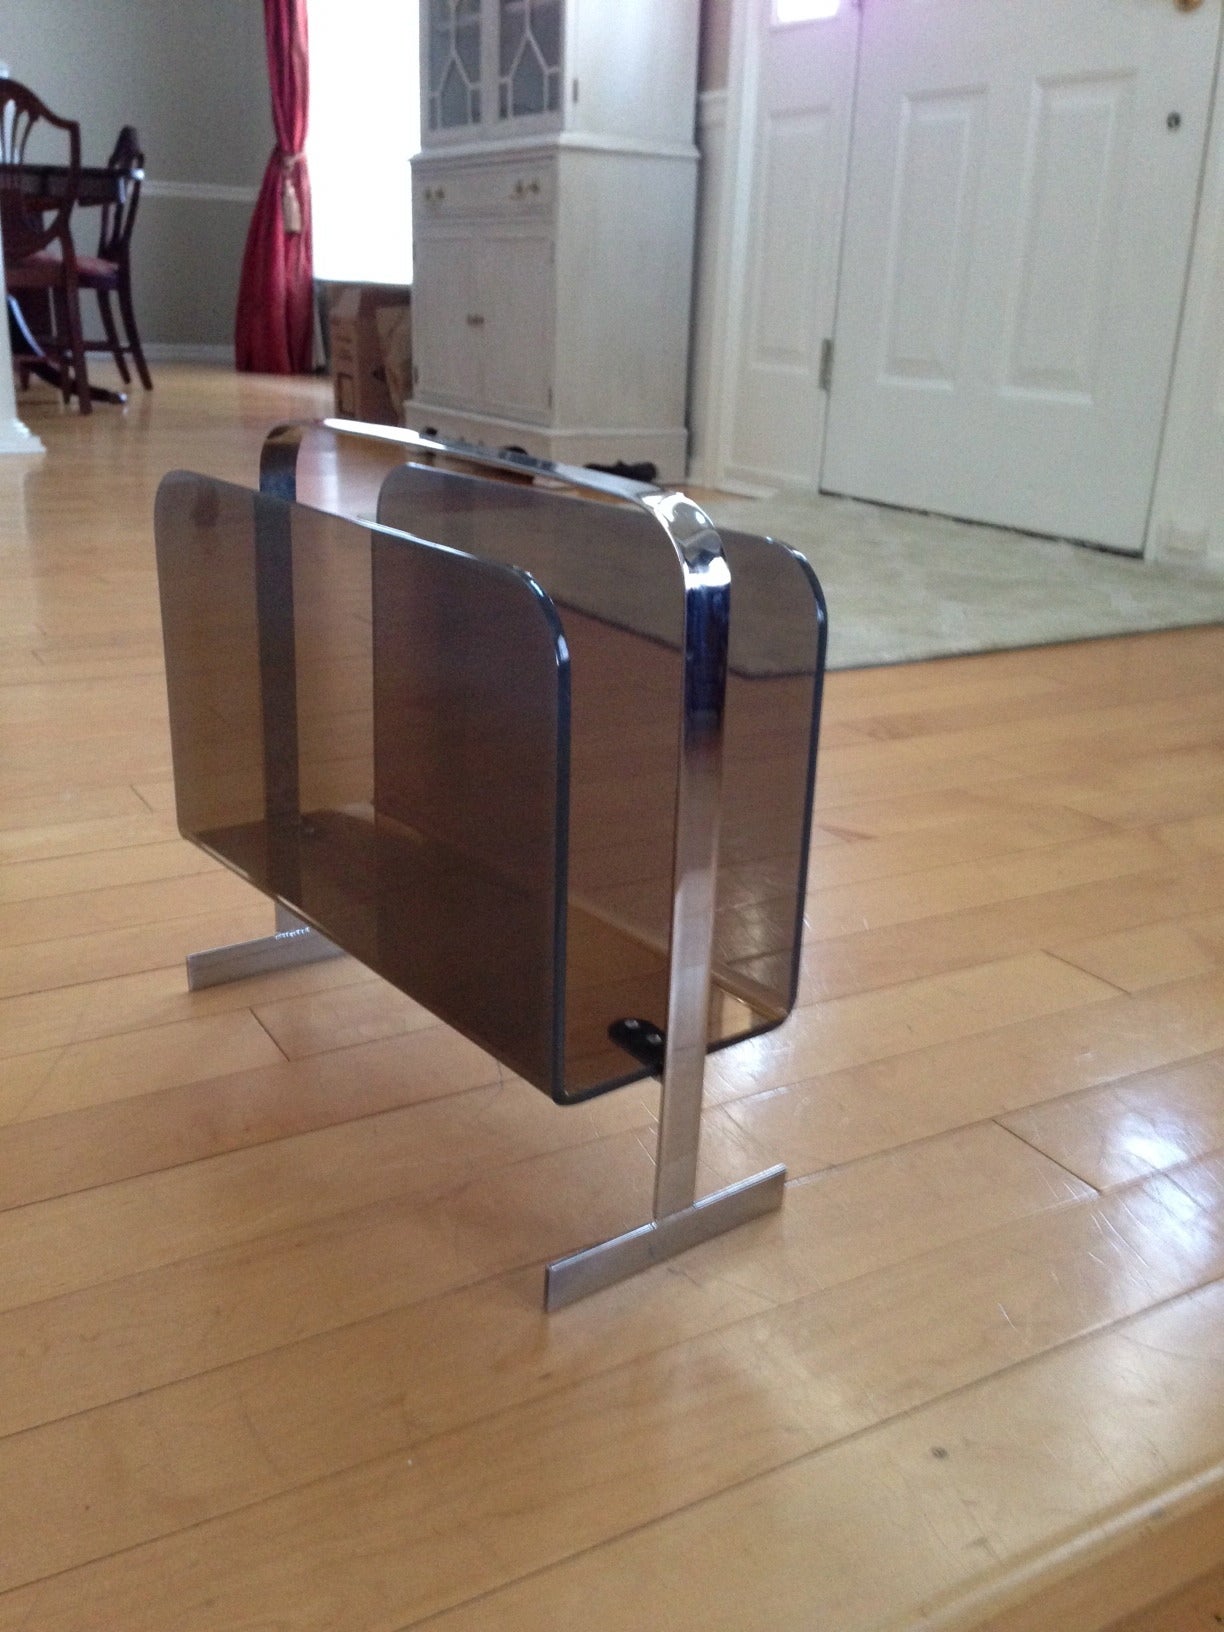 Mid Century Smoked Lucite and Chrome Magazine Stand
in style of Milo Baughman